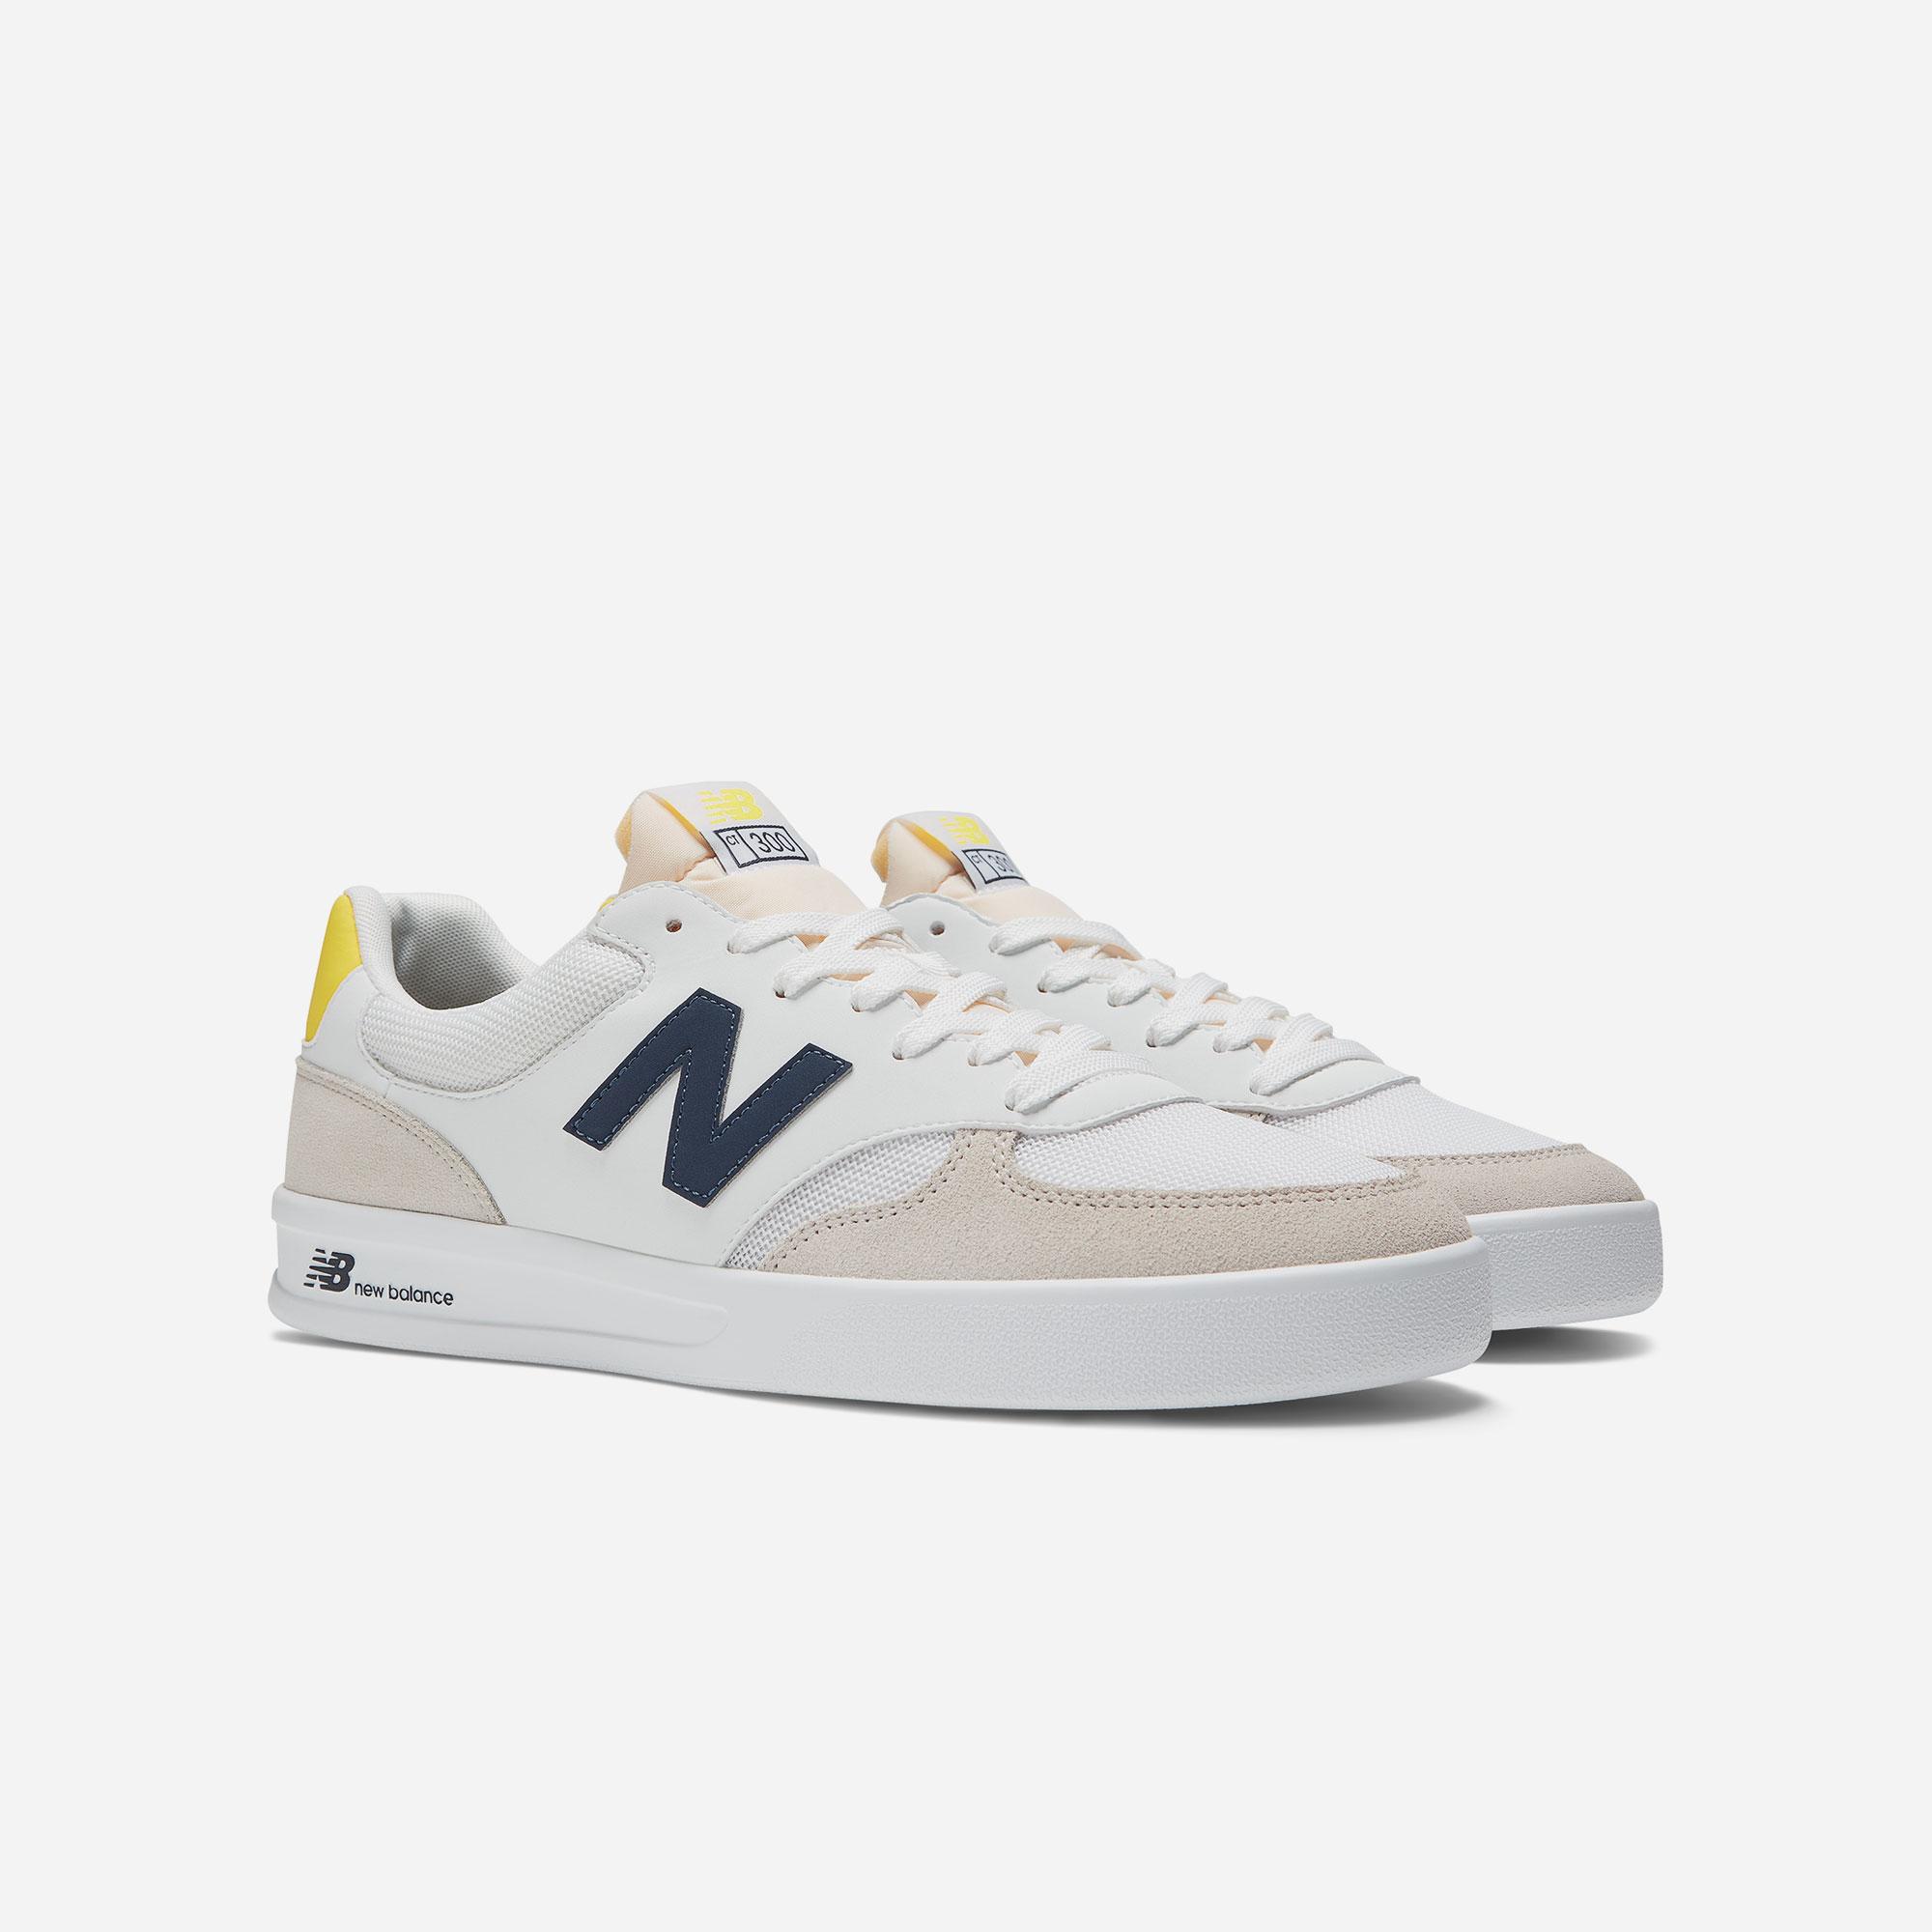 Giày sneaker nam New Balance Ct300 - CT300SY3